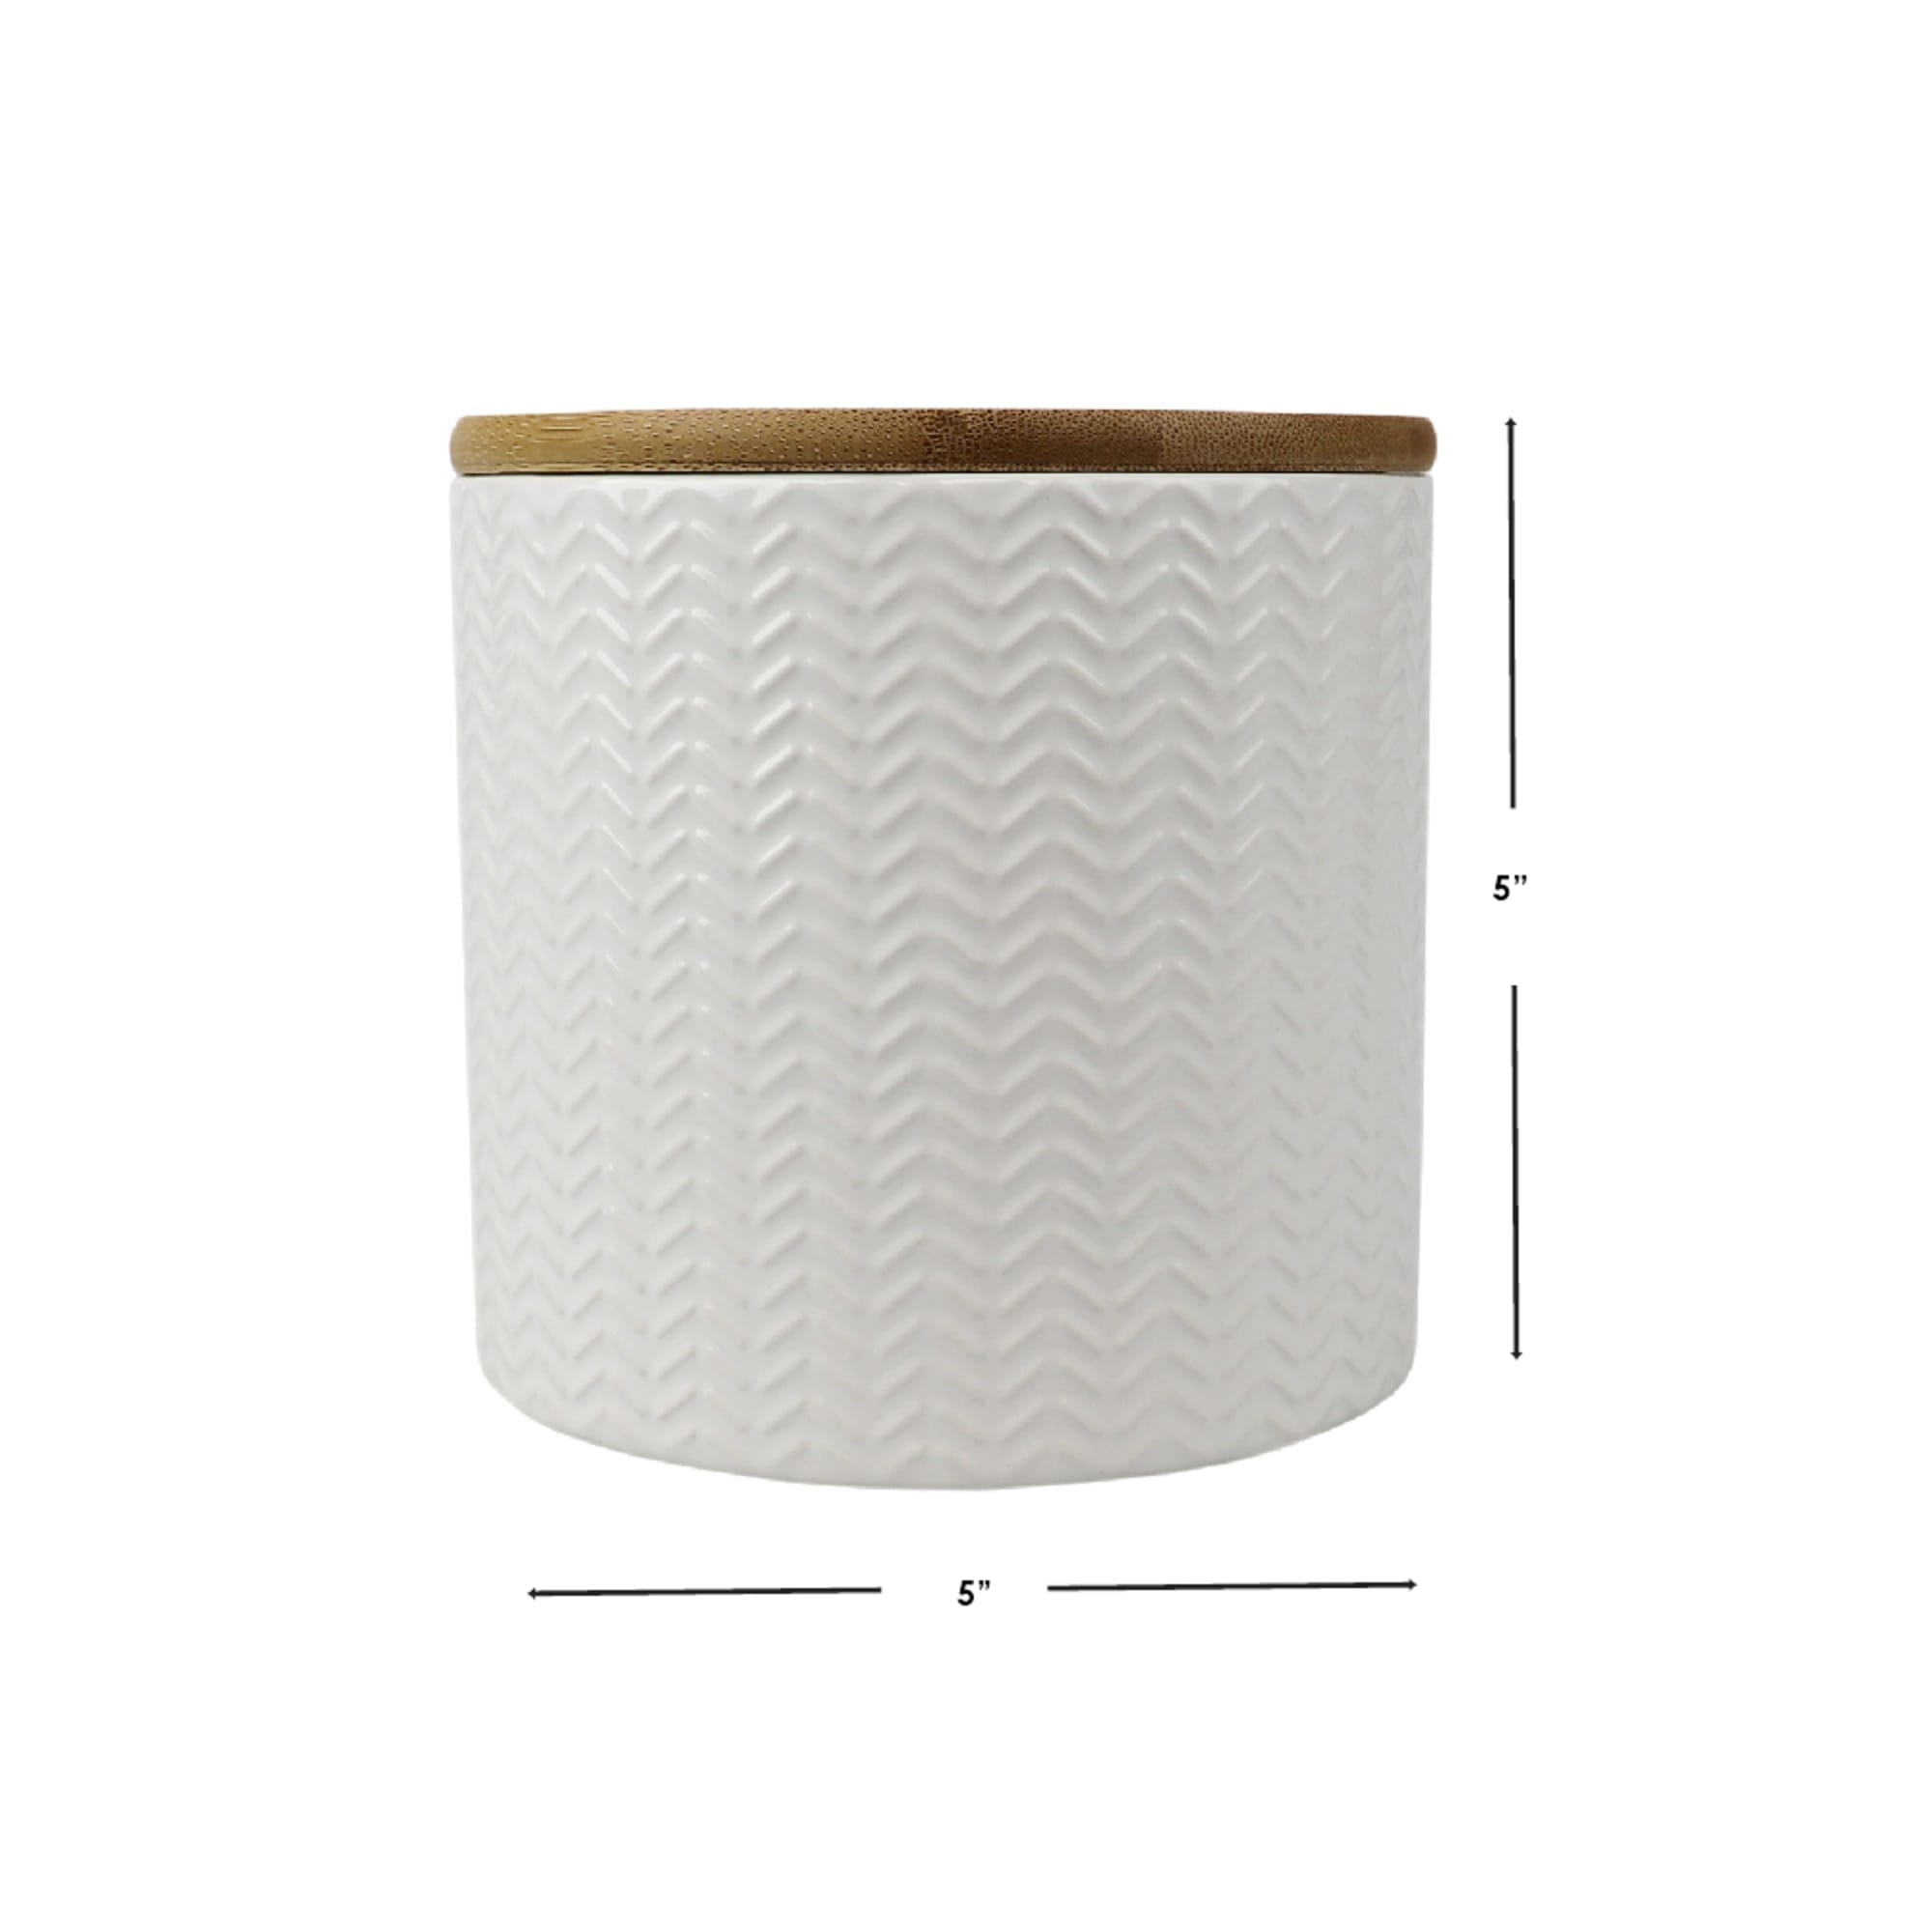 Home Basics Wave Small Ceramic Canister, White $5.00 EACH, CASE PACK OF 12